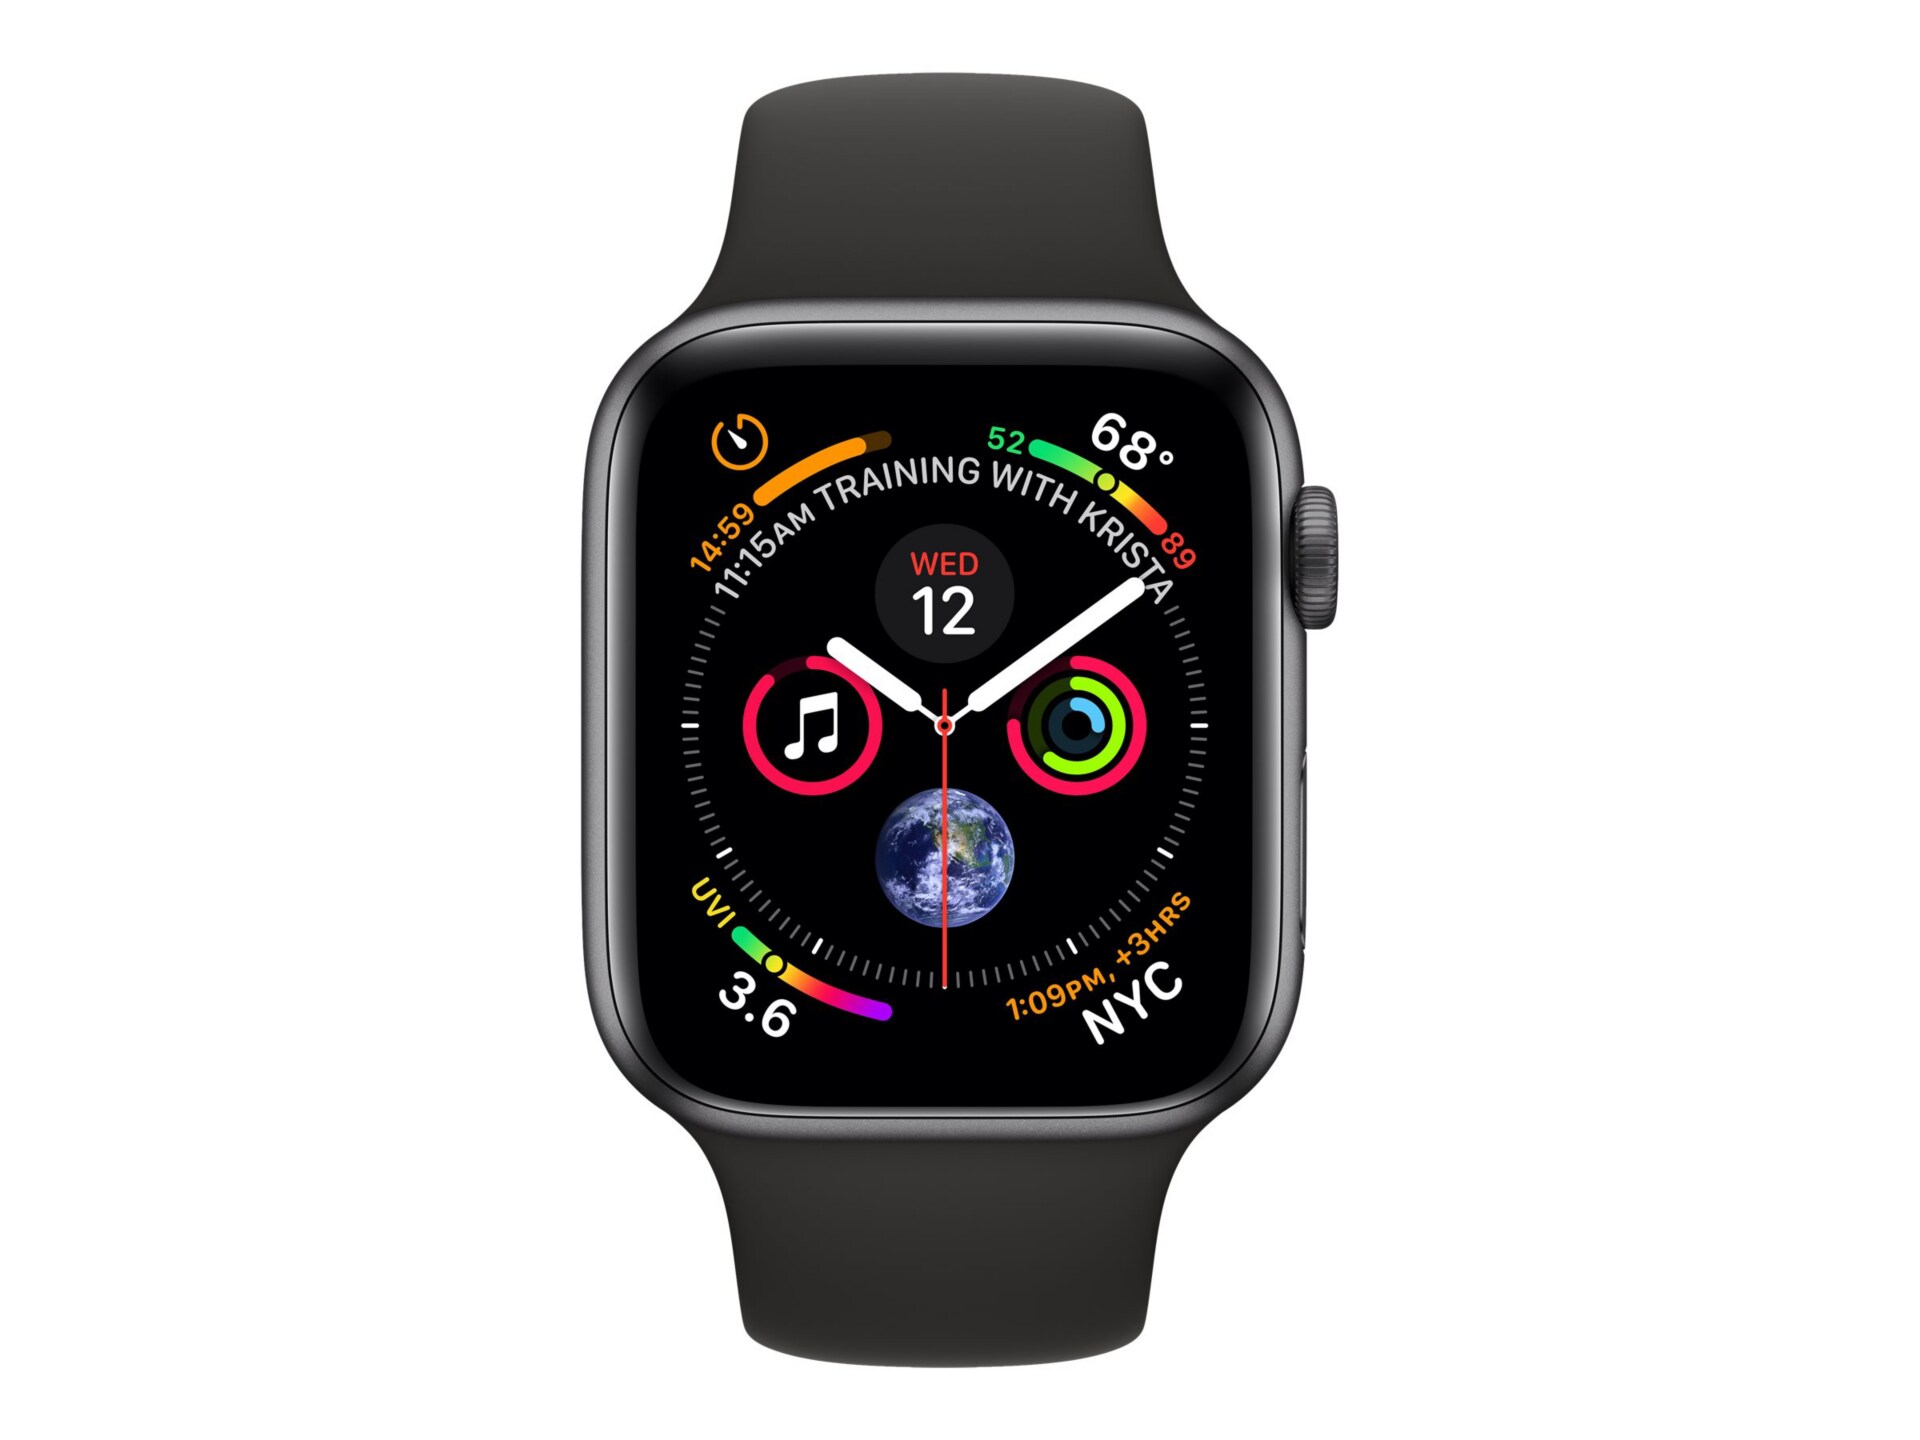 Apple Watch Series 4 (GPS) - space gray aluminum - smart watch with sport b